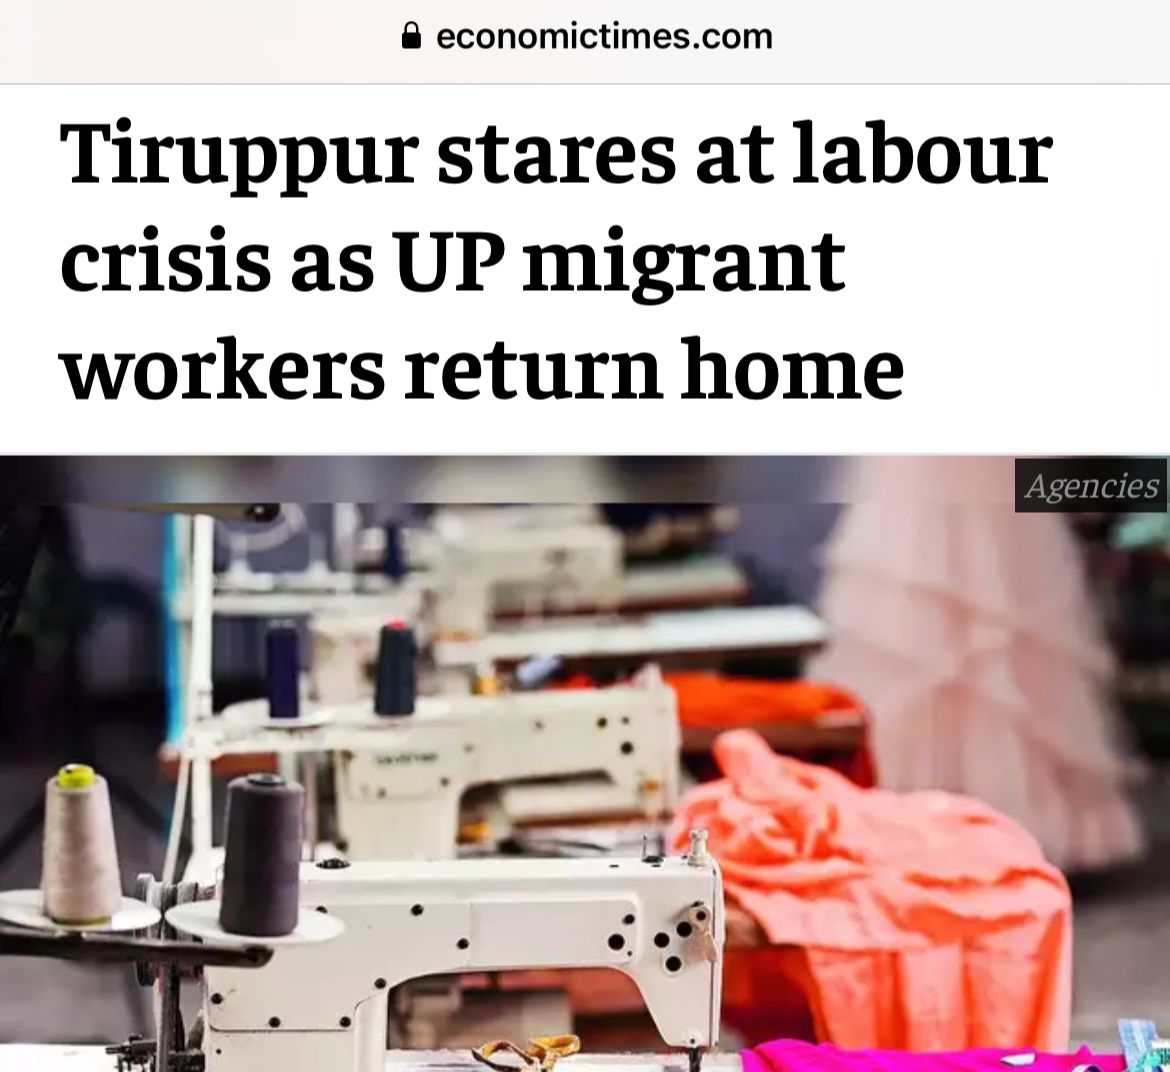 Over 60,000 migrant workers are returning to UP from Tiruppur (Tamilnadu) because they're getting better opportunities in UP. 
Tiruppur may face workers issues soon.

CM @myogiadityanath @CMOfficeUP deserves all the credits for it.

#UPTransformed 🫡